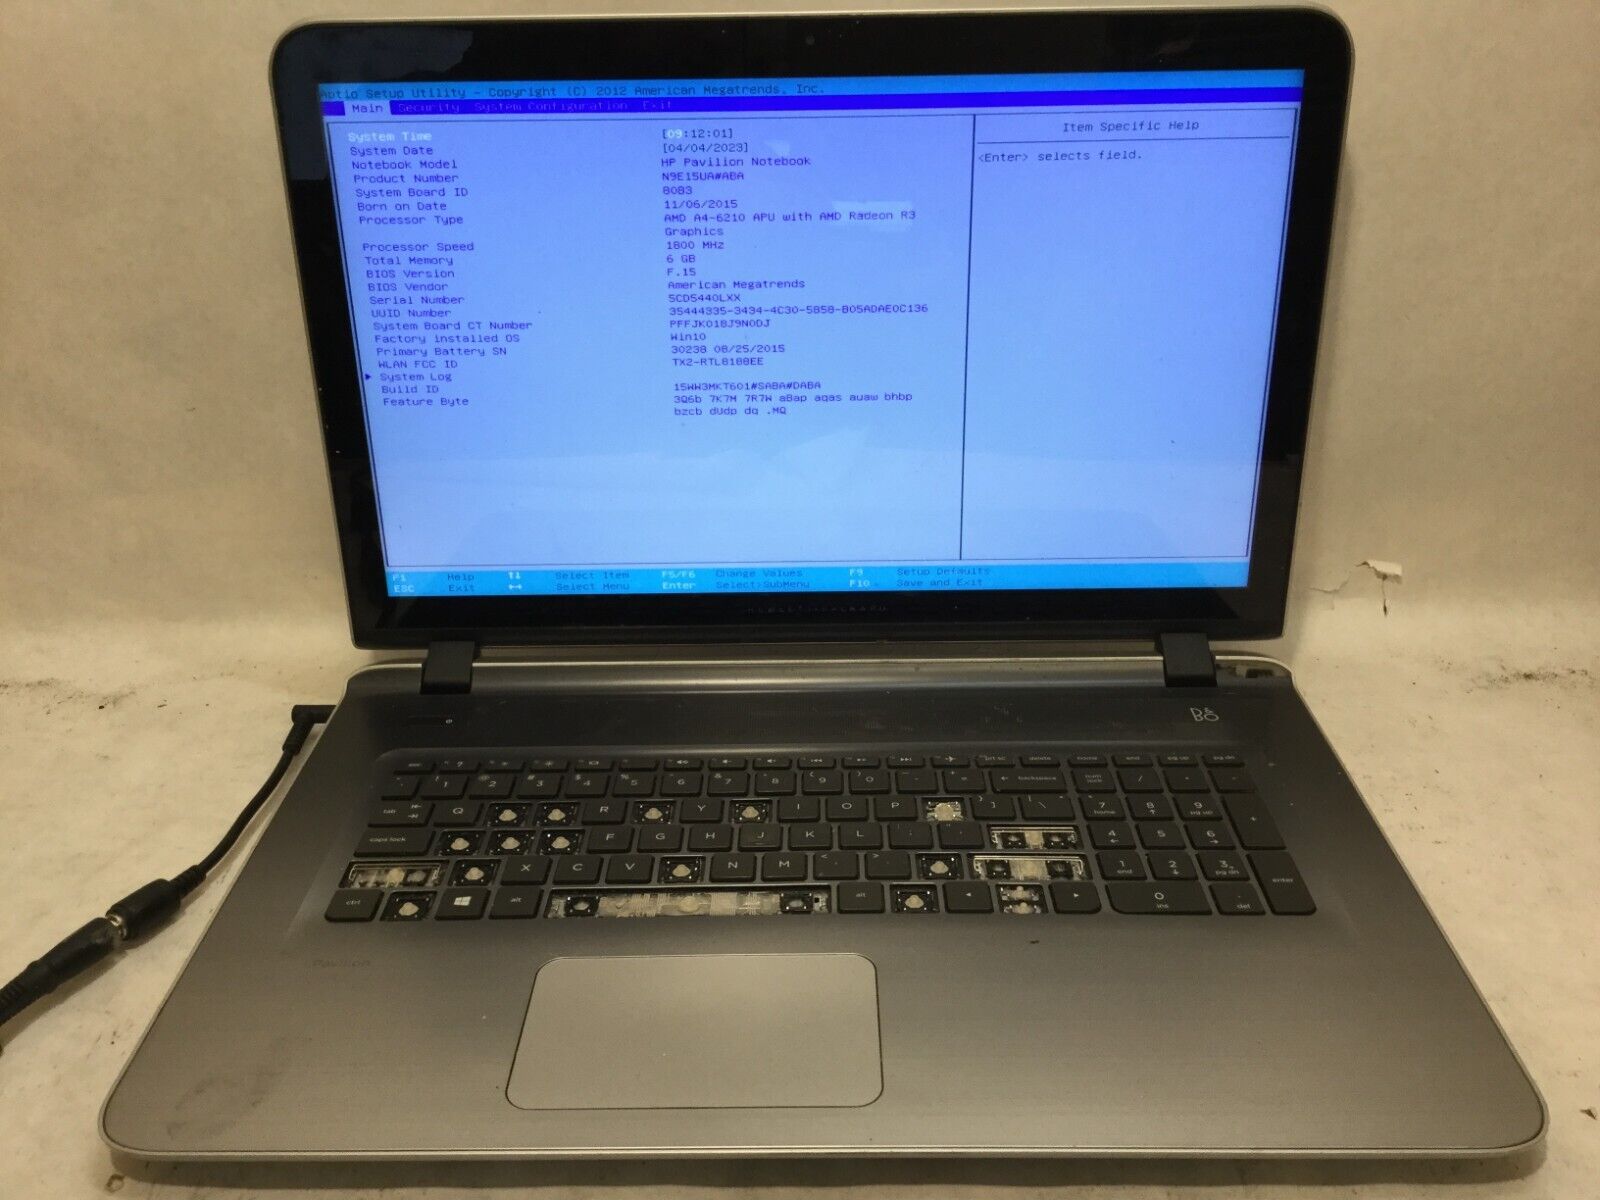 HP Pavilion 17-g134cy / AMD A4-6210 R3 @ 1.80 GHz / (MISSING PARTS) -MR